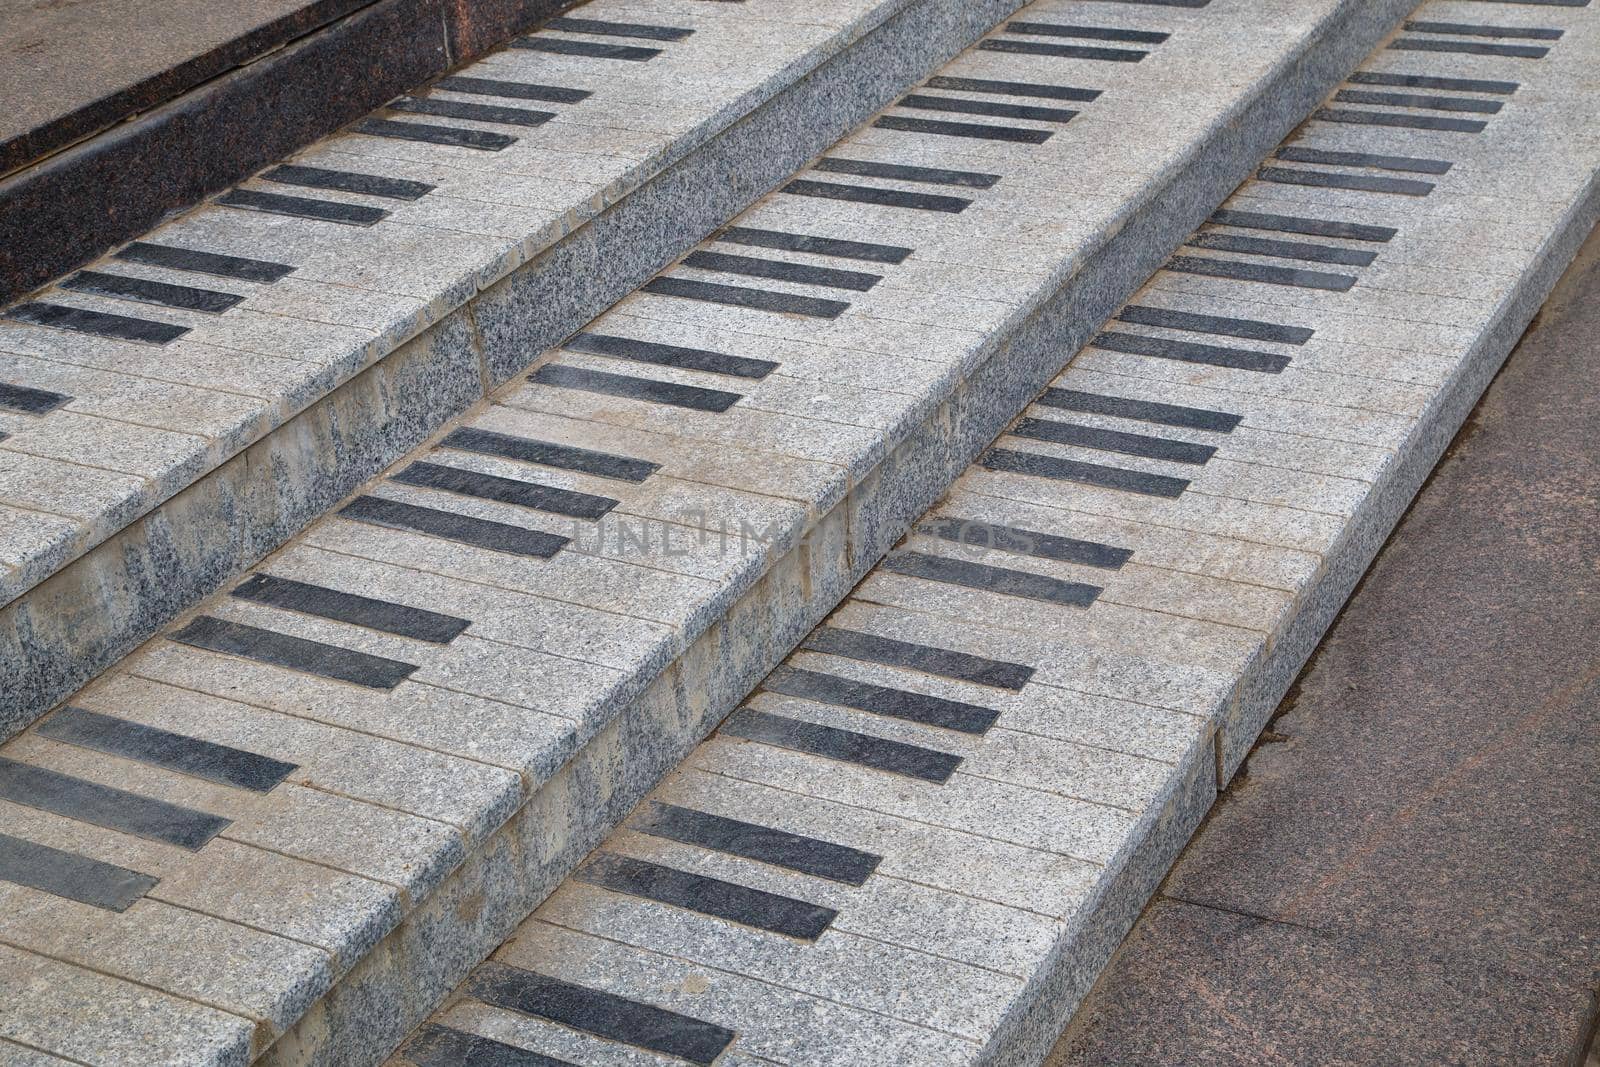 public granite stairs stylised as piano keys - close-up view with diagonal composition